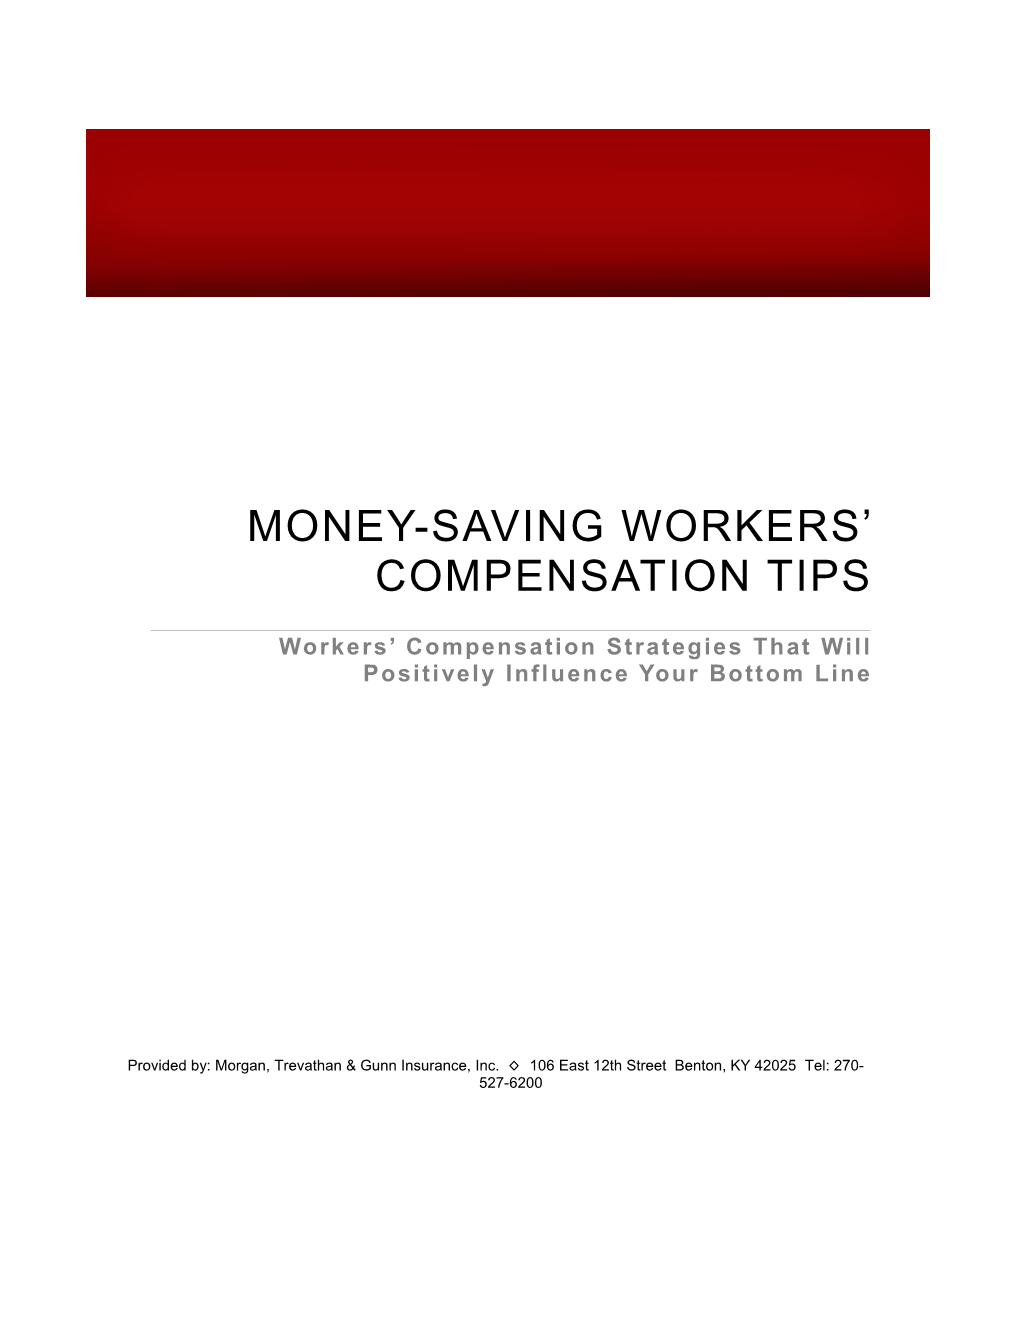 Workers Compensation Strategies That Will Positively Influence Your Bottom Line